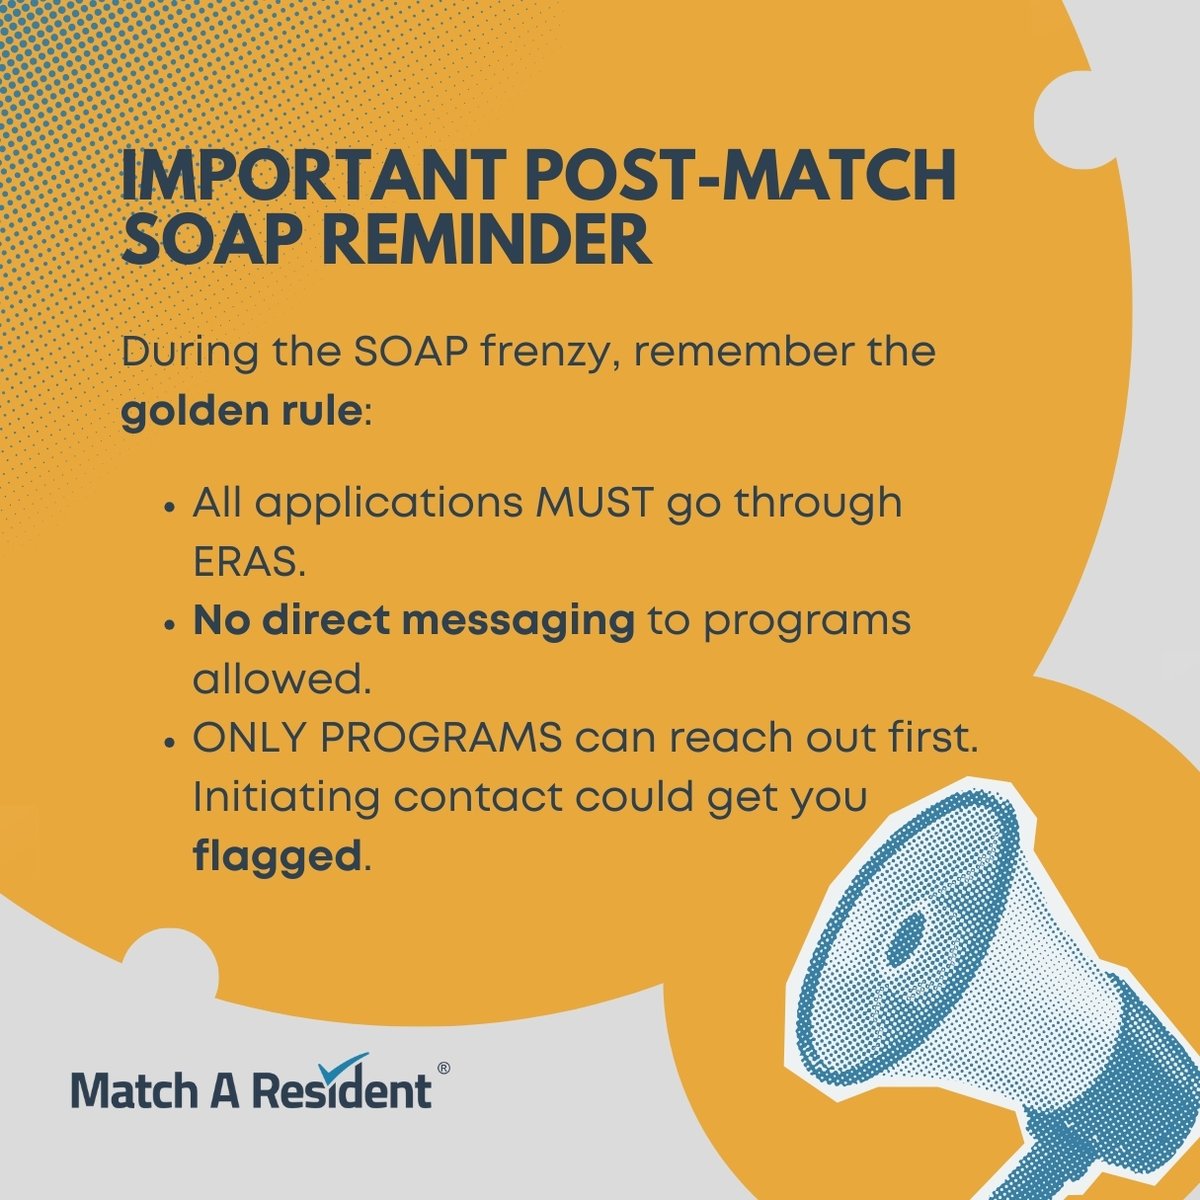 ⚠️SOAP Alert⚠️ Apply ONLY via ERAS; direct contact with programs is off-limits 🚫 Programs initiate contact or you risk being flagged. Follow the rules for a smooth SOAP journey. Patience pays off! 🌟 #SOAPRules #Match2024 #ERASGuidelines #SOAP45Prep #MatchAResident #MedTwitter